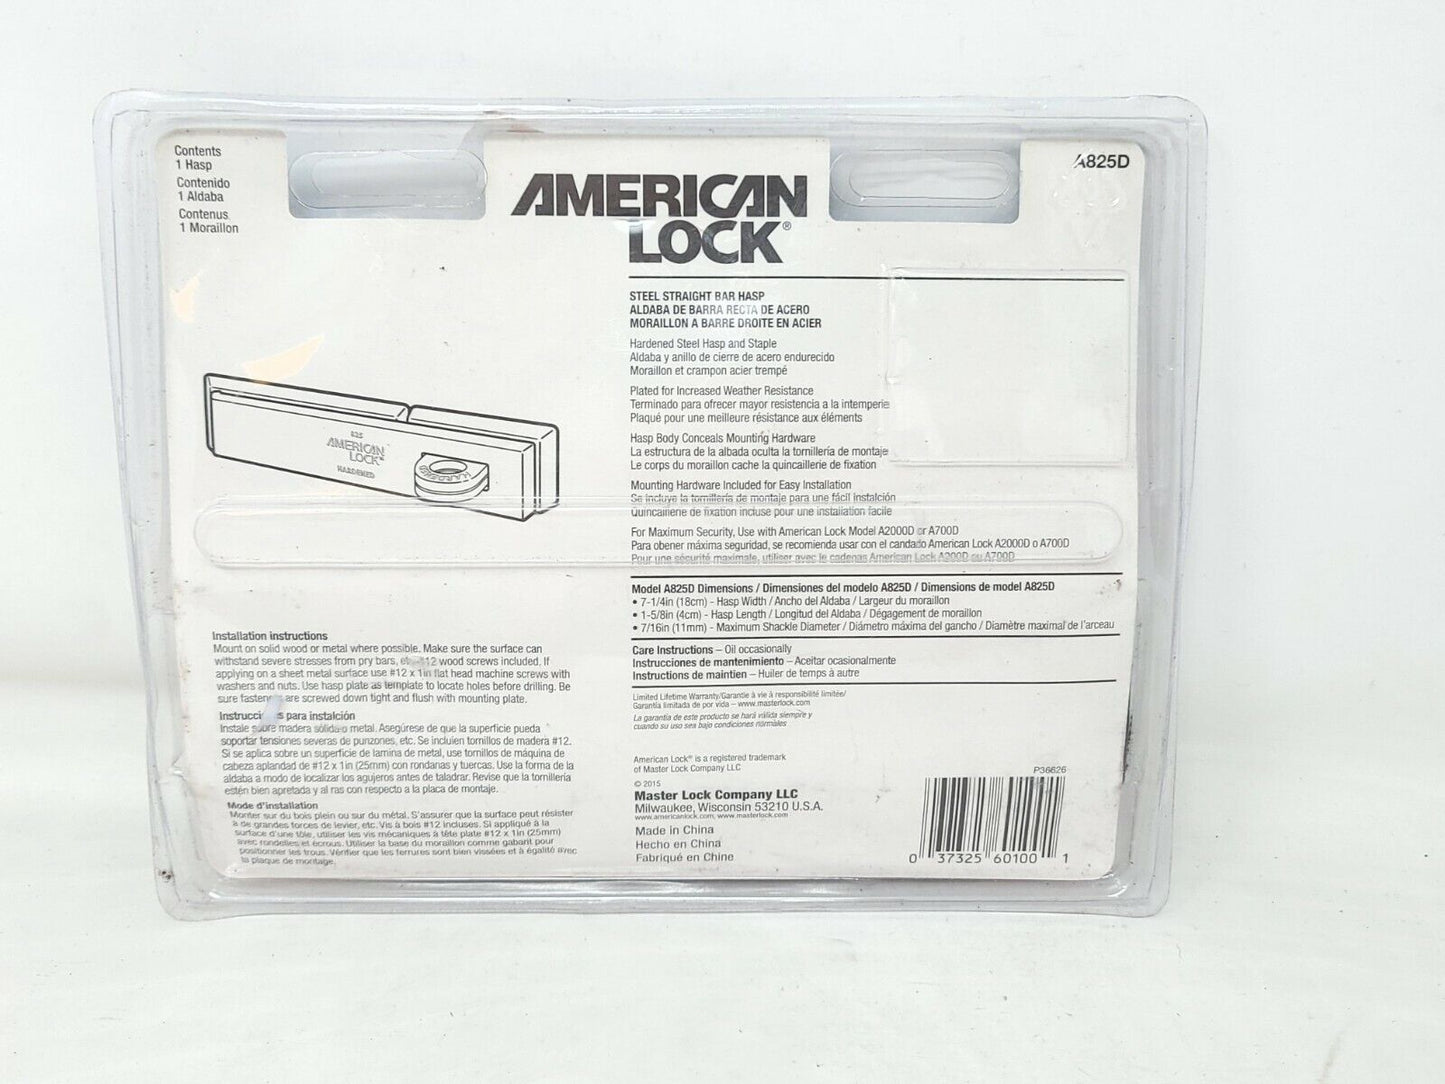 American Lock Steel Straight Bar Hasp A825D - New in Package.